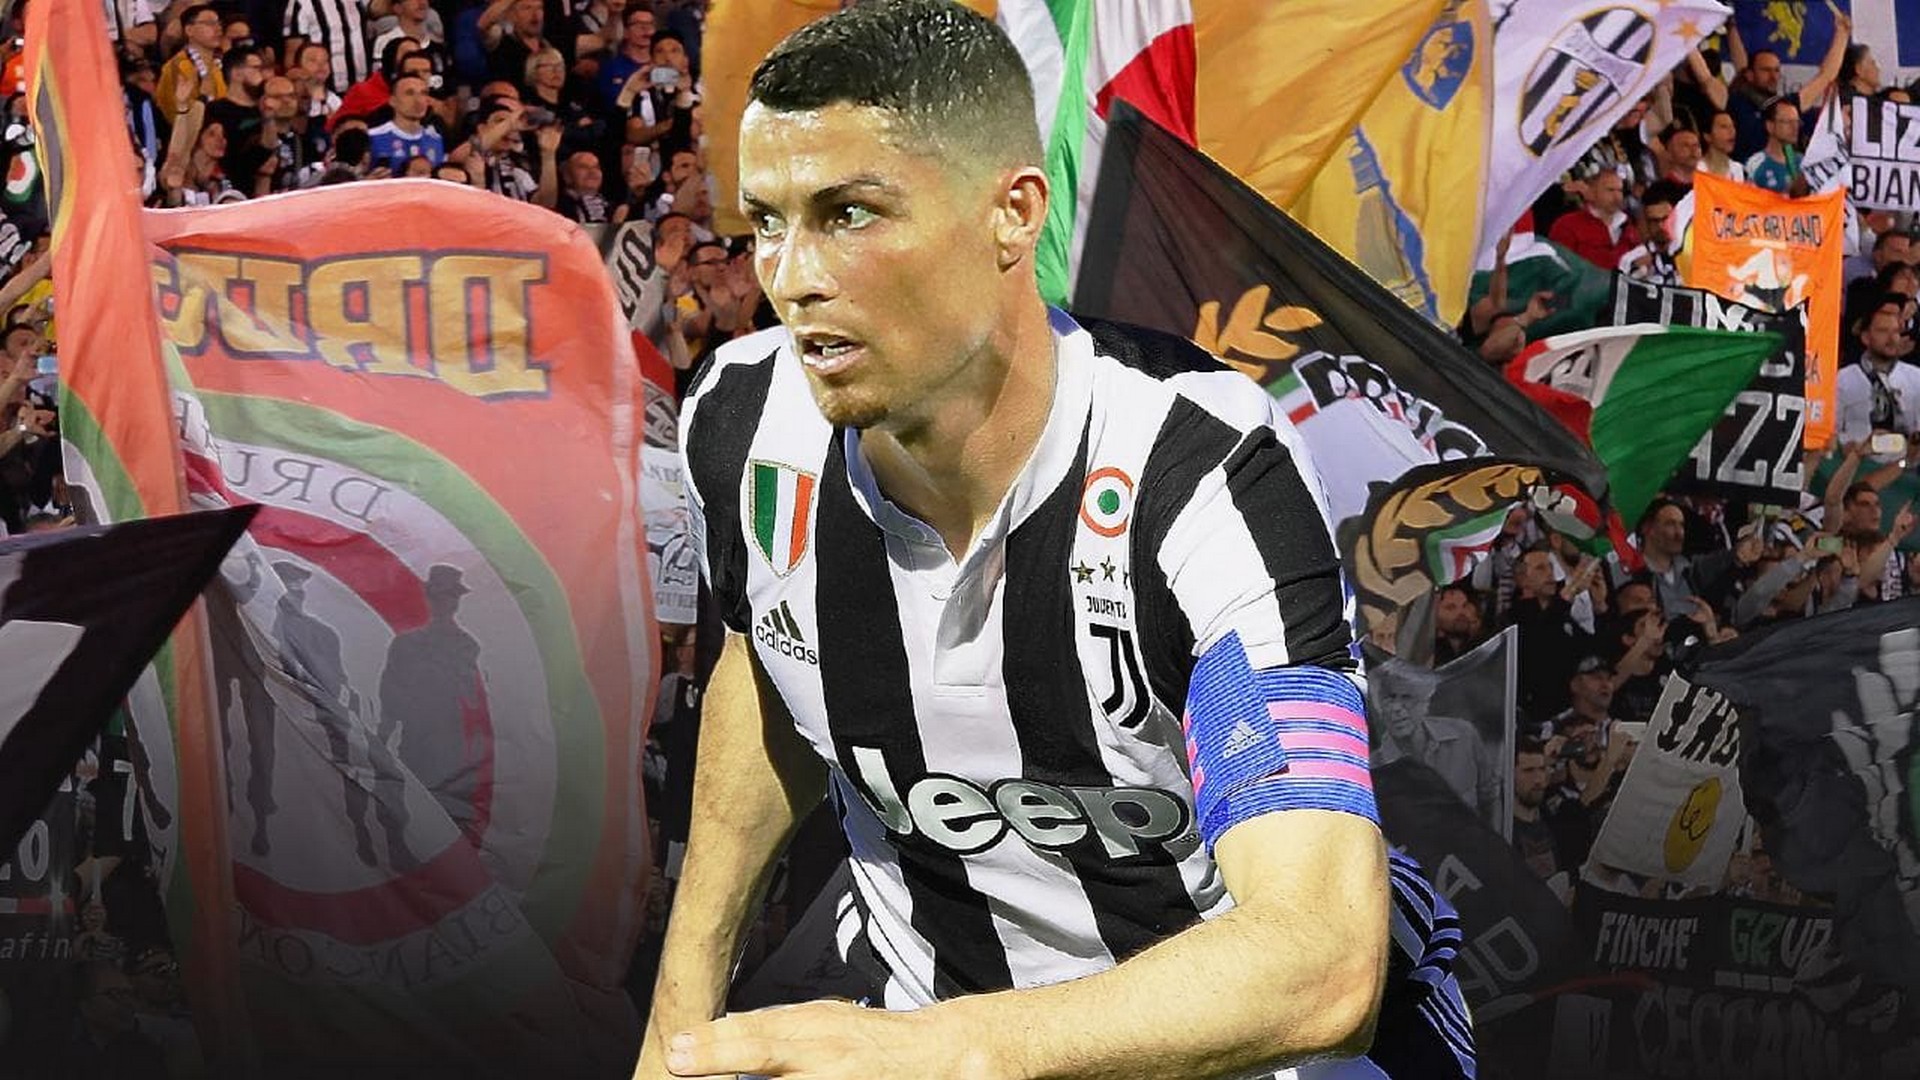 C Ronaldo Juventus Wallpaper HD with image resolution 1920x1080 pixel. You can make this wallpaper for your Desktop Computer Backgrounds, Mac Wallpapers, Android Lock screen or iPhone Screensavers